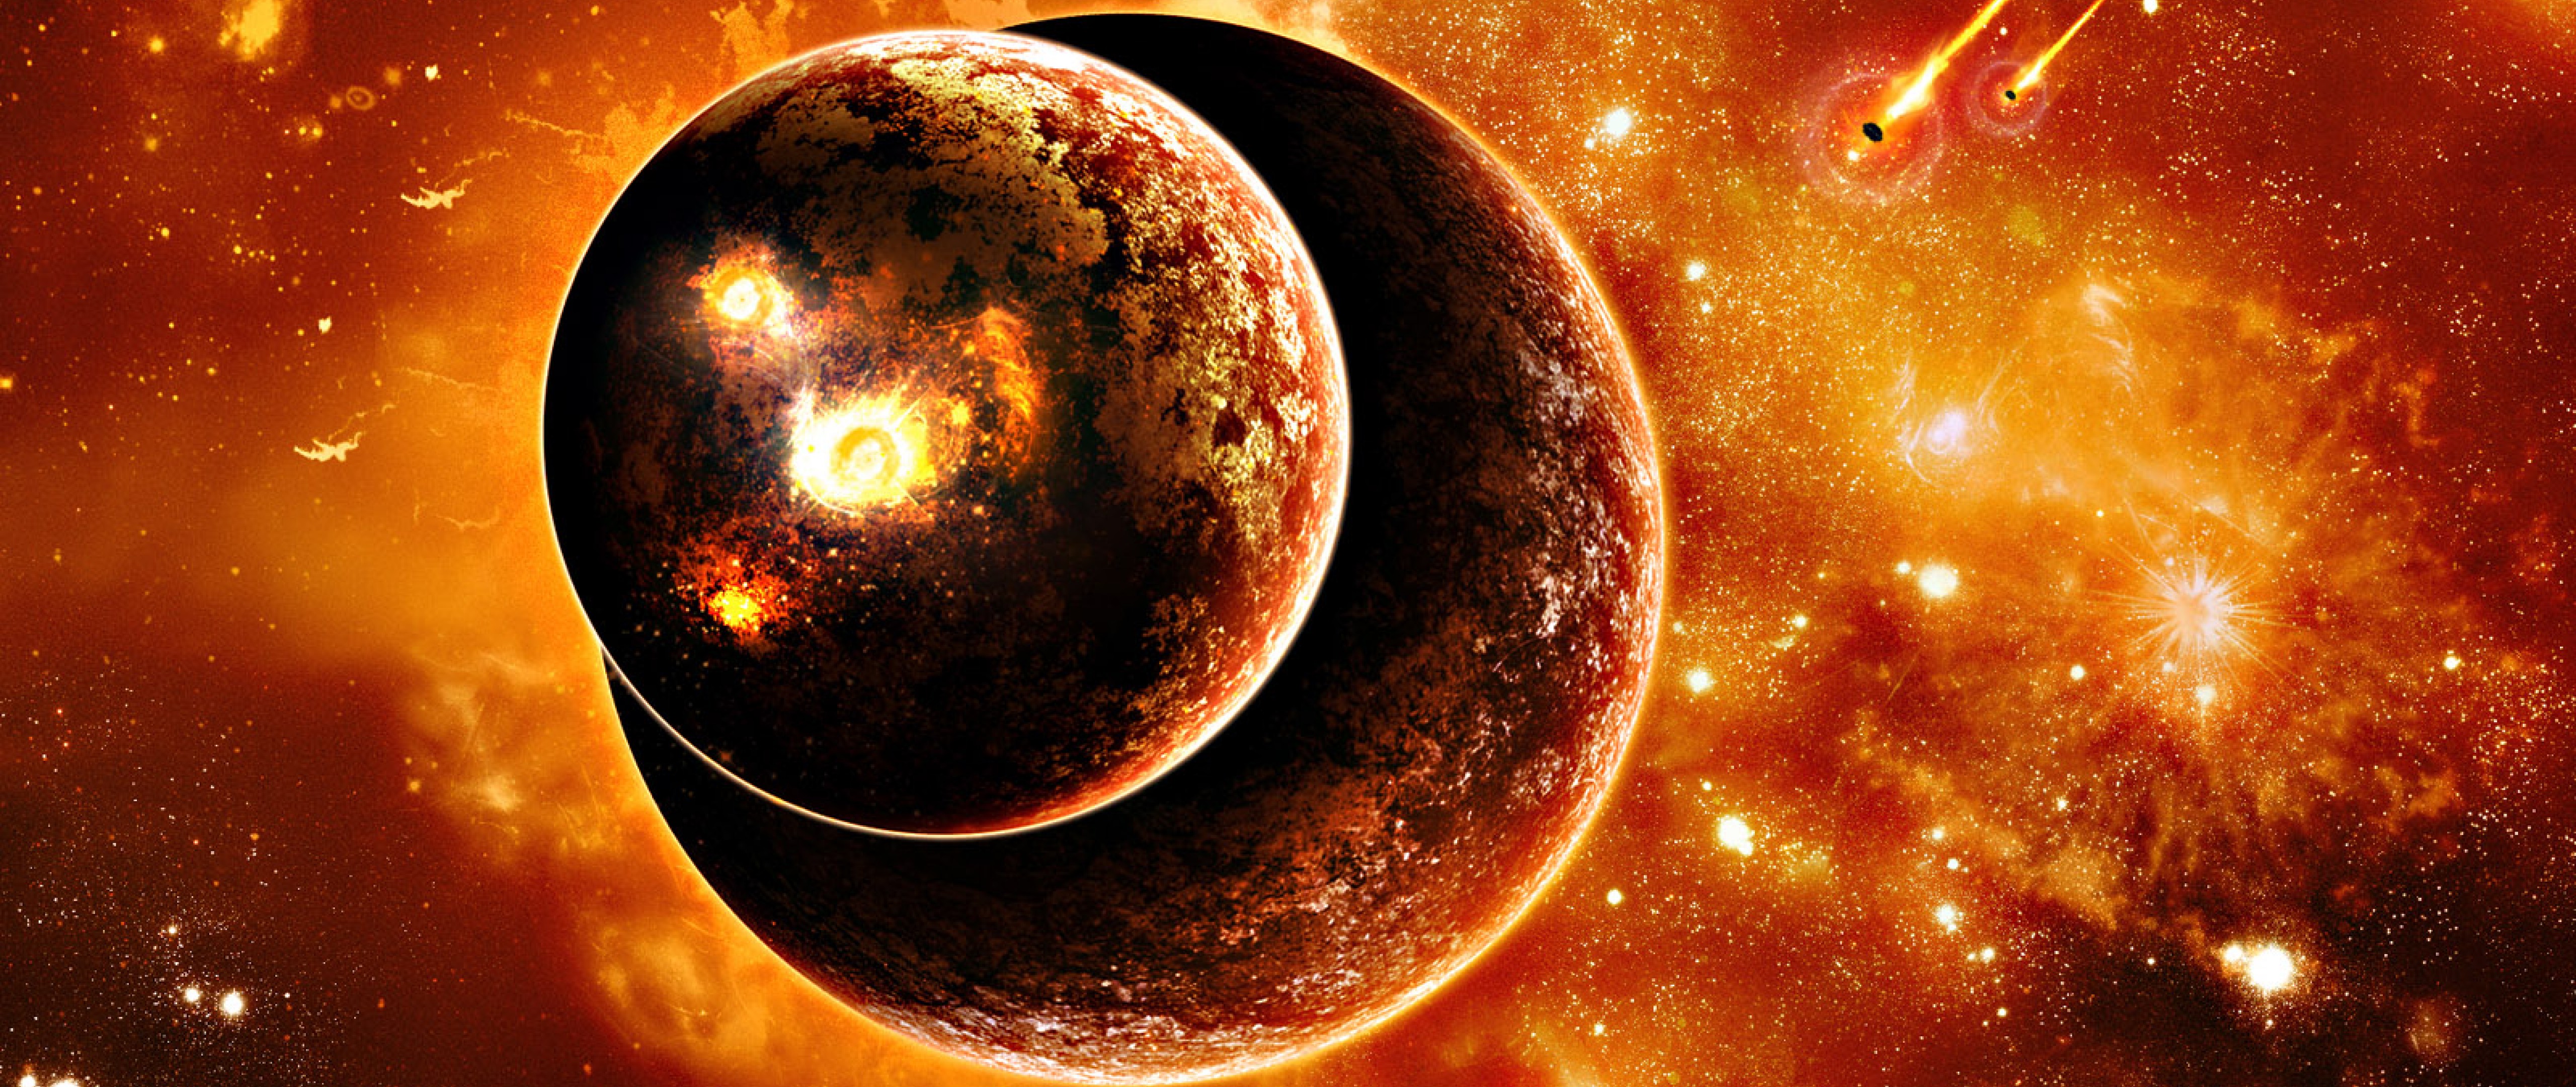 Download Burning Planets Live Wallpaper for Desktop and Mobiles 4K Ultra HD  Wide TV - HD Wallpaper 